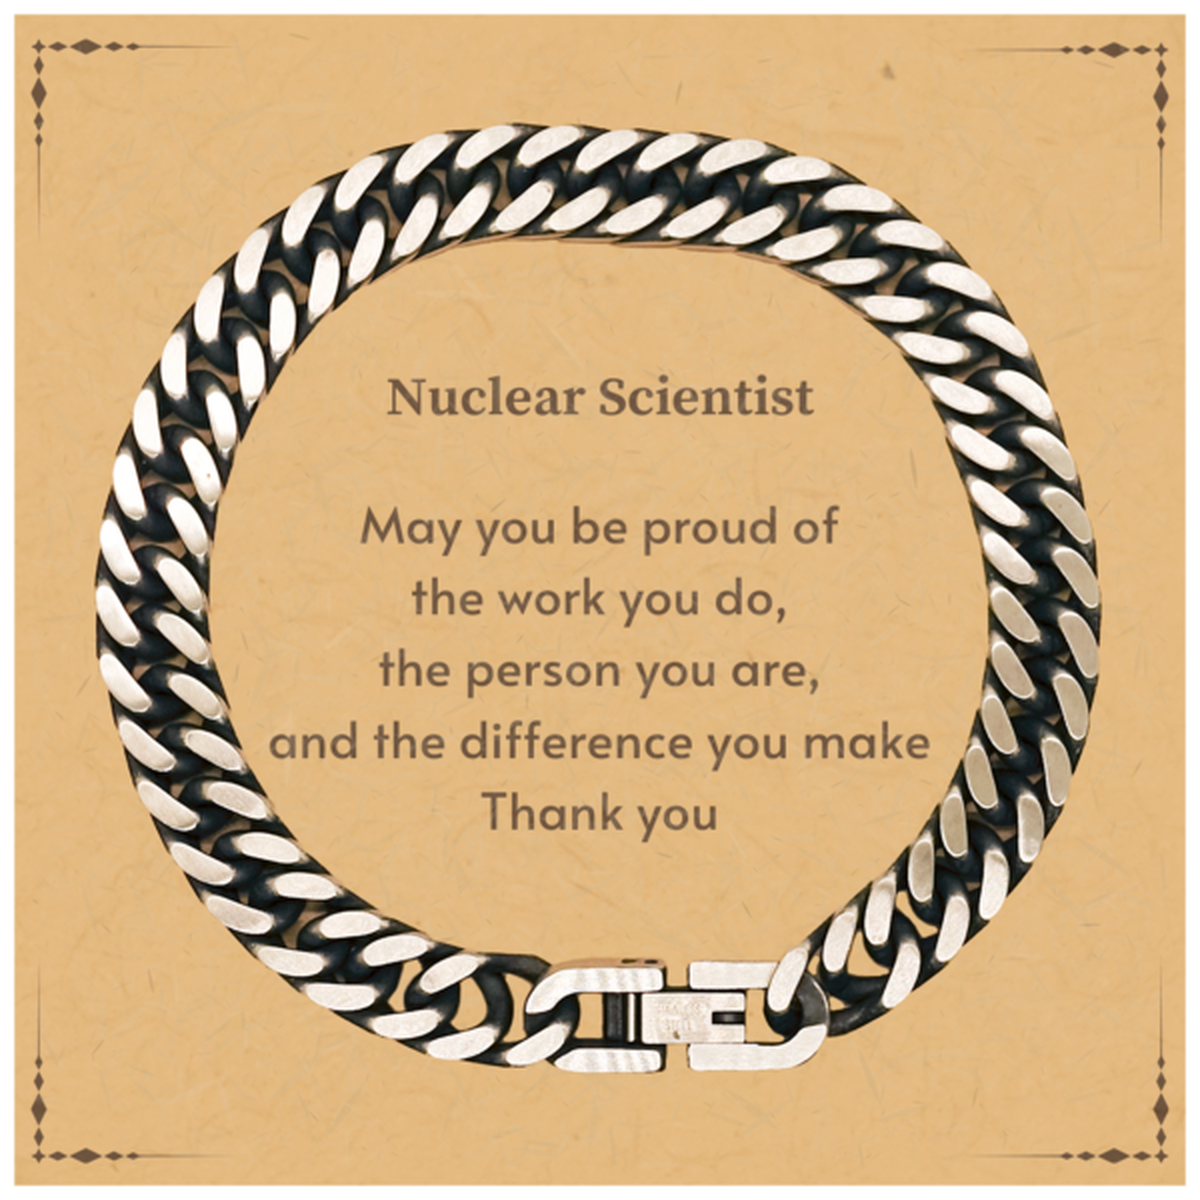 Heartwarming Cuban Link Chain Bracelet Retirement Coworkers Gifts for Nuclear Scientist, Nuclear Scientist May You be proud of the work you do, the person you are Gifts for Boss Men Women Friends